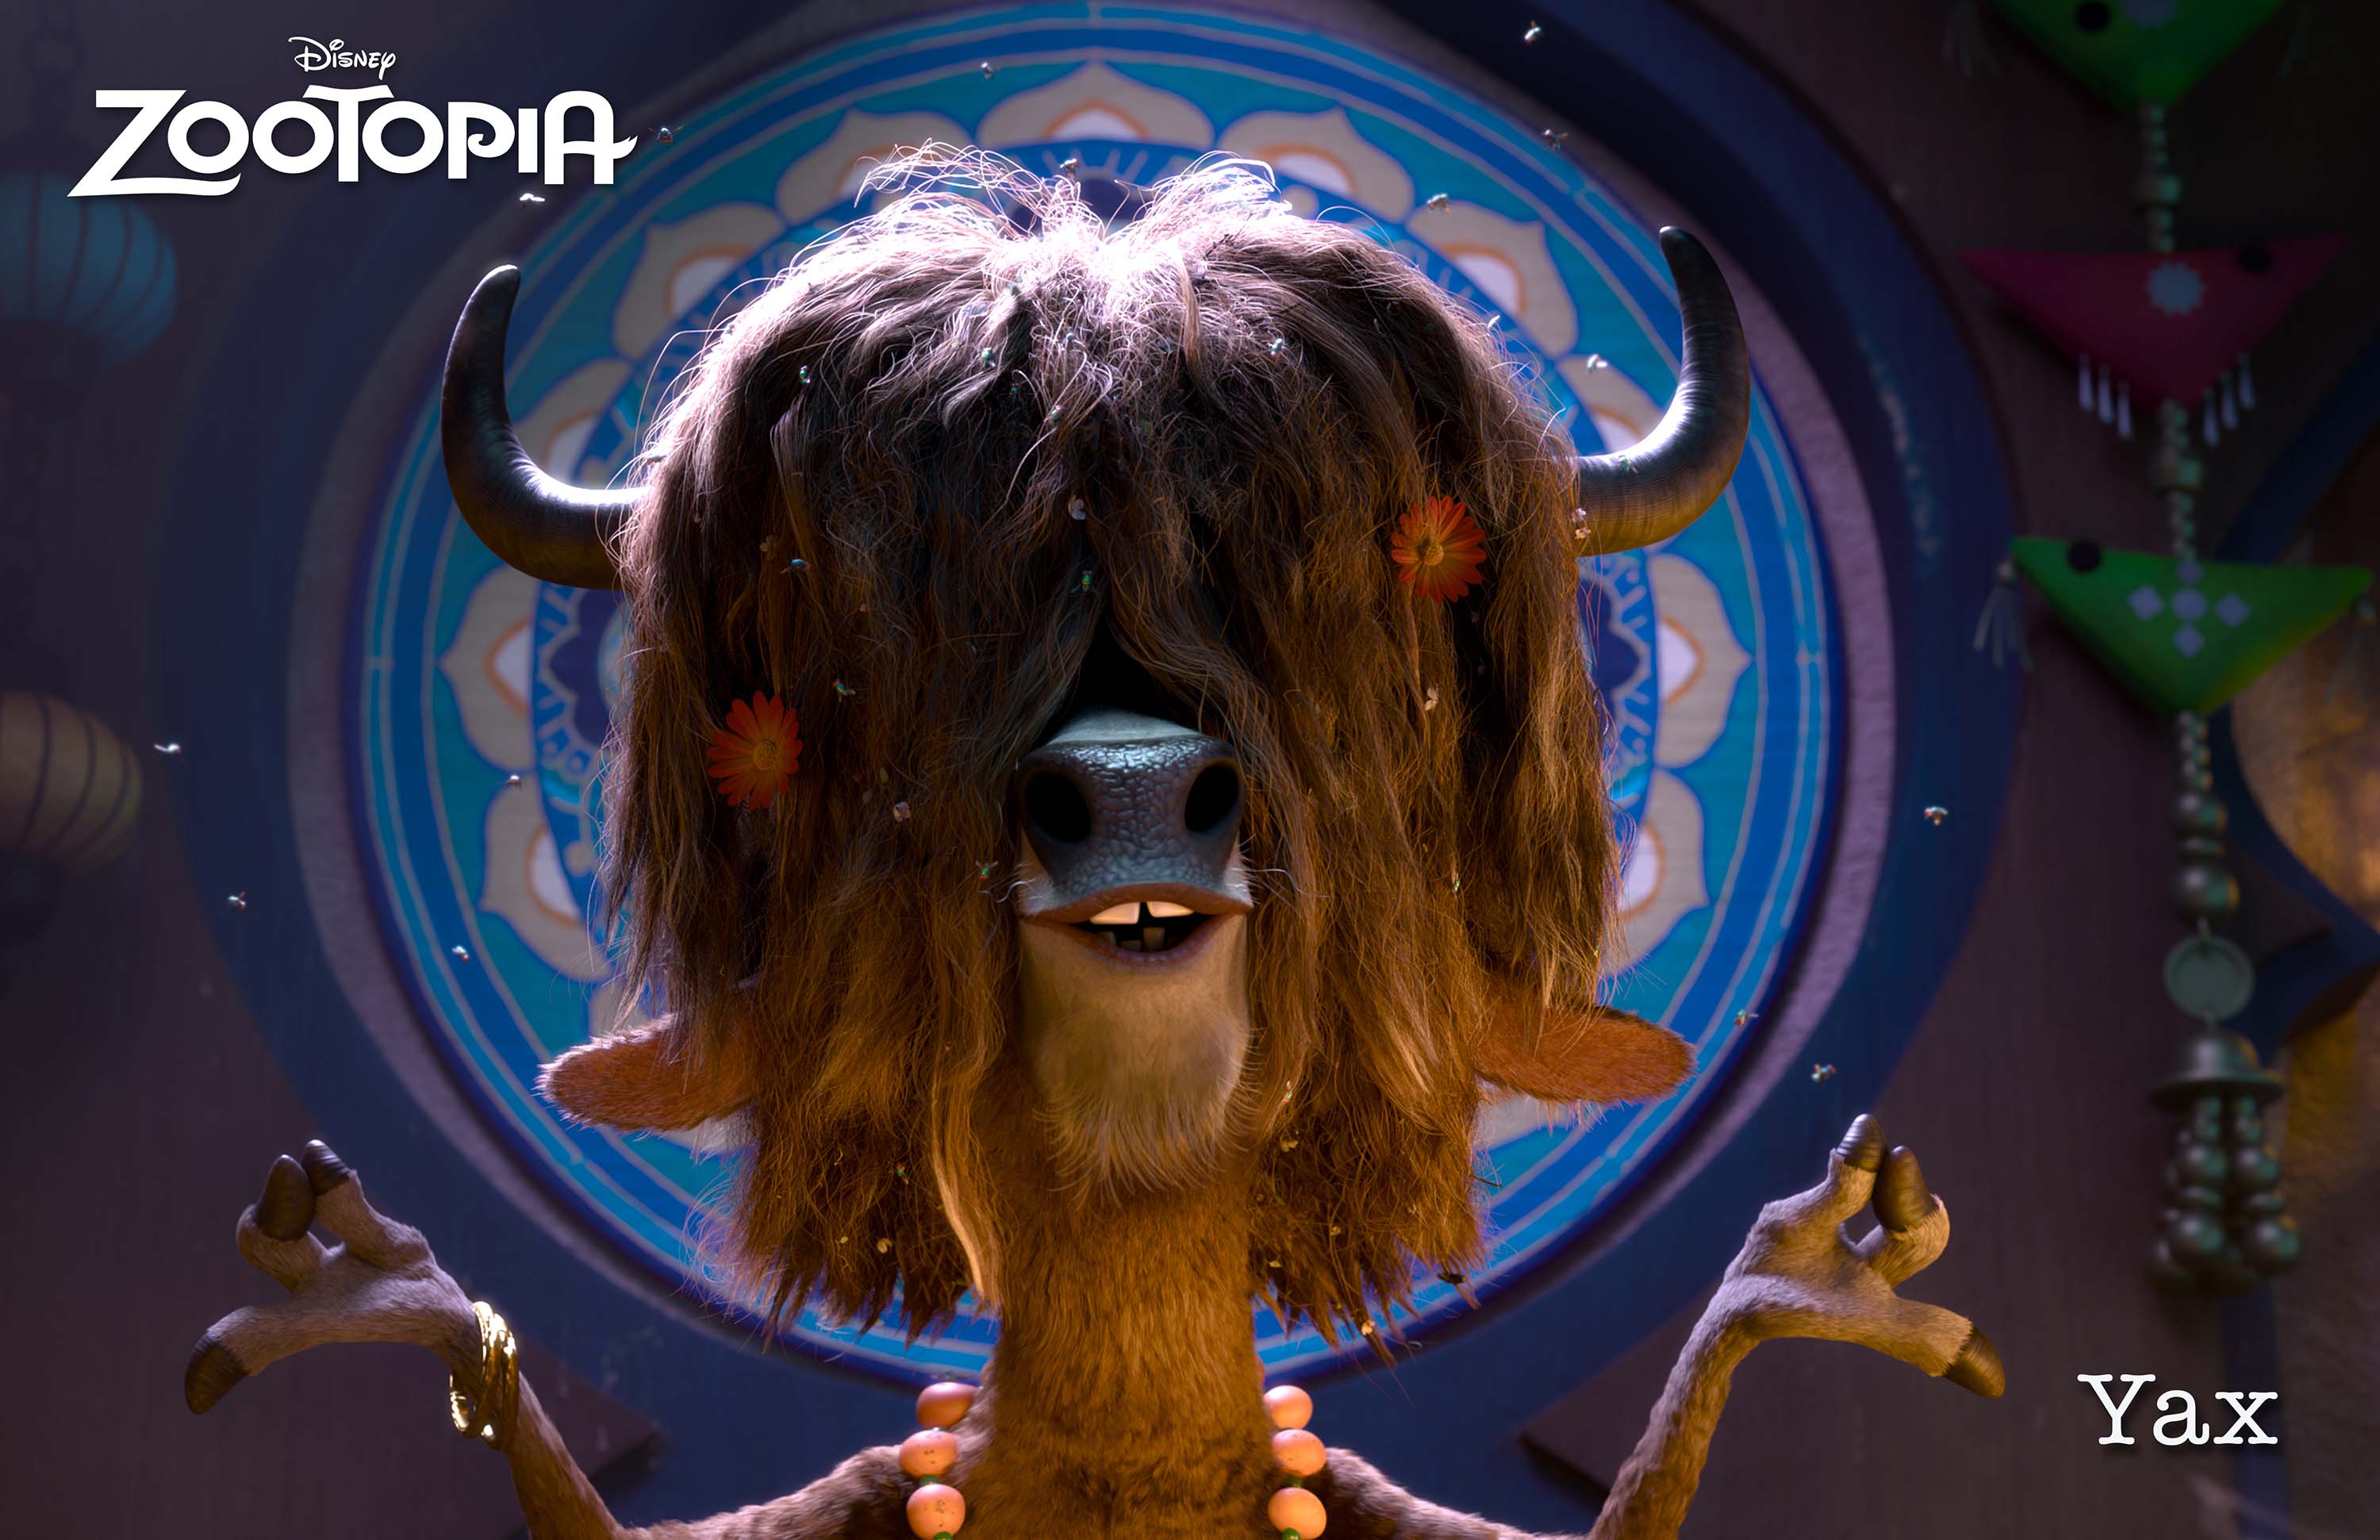 ZOOTOPIA â€“ YAX THE YAK, the most enlightened, laid-back bovine in Zootopia. When Judy Hopps is on a case, Yax is full of revealing insights. Â©2015 Disney. All Rights Reserved.